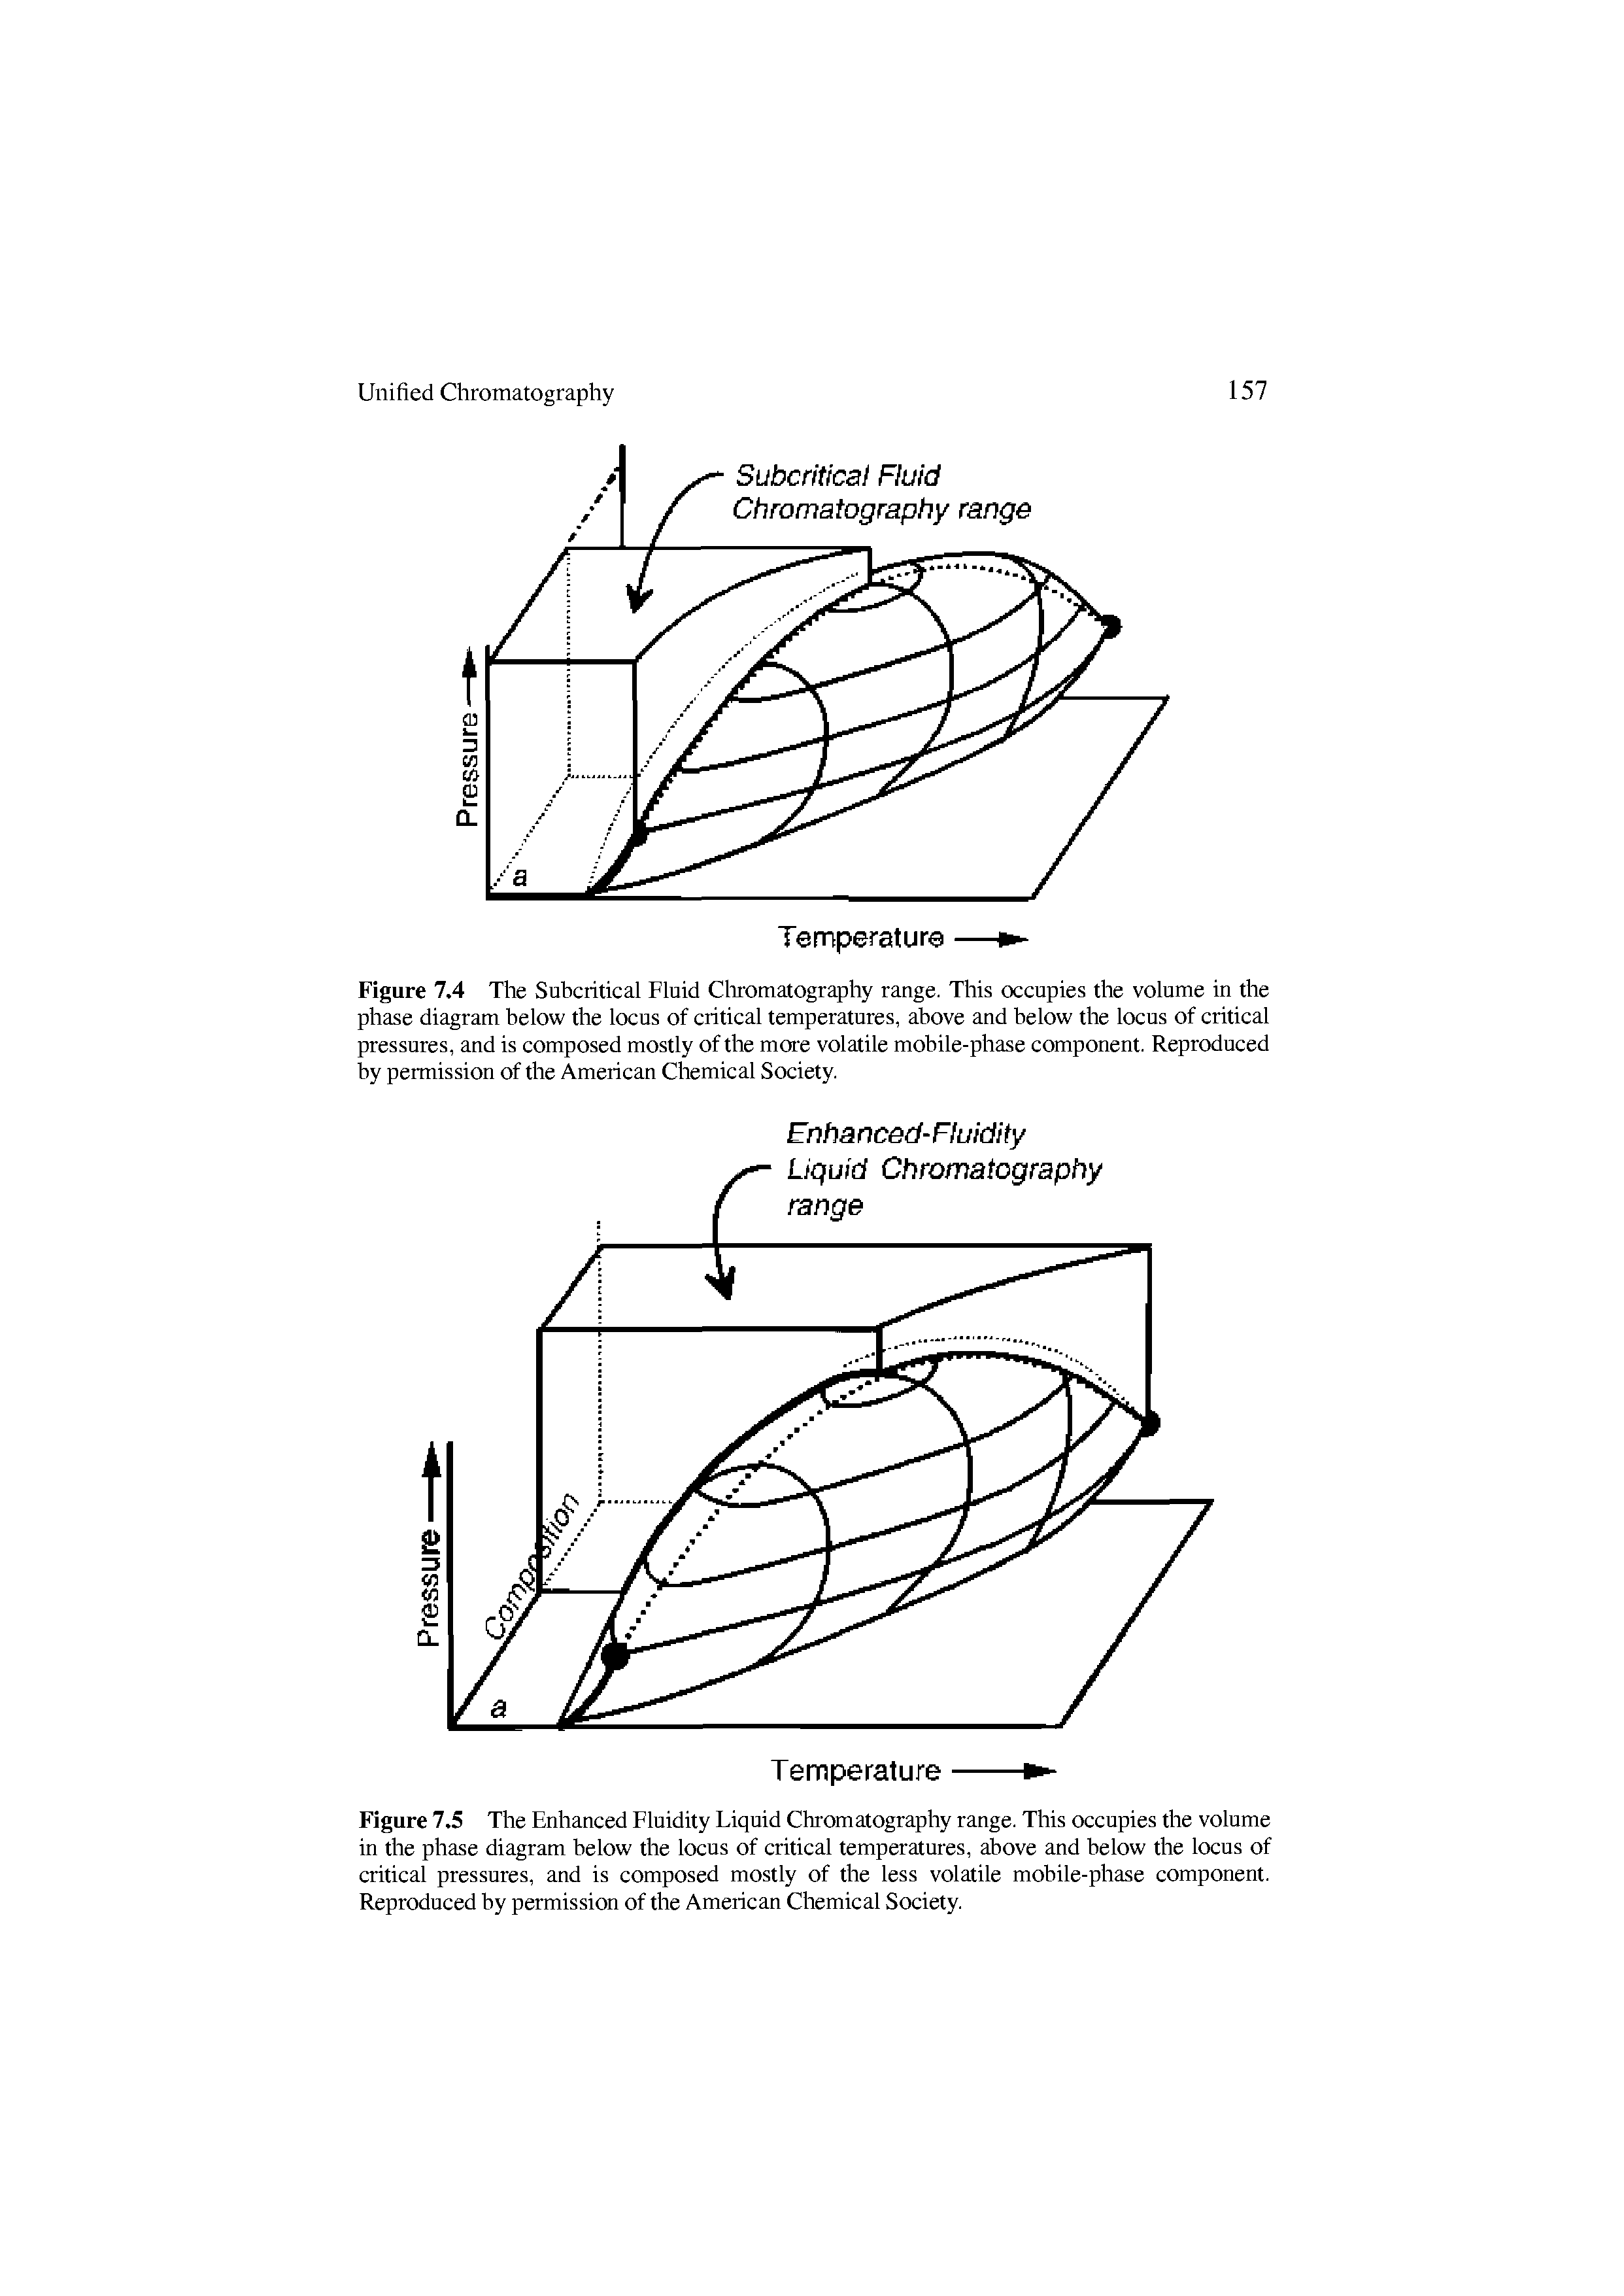 Figure 7.4 The Subcritical Fluid Cliromatography range. This occupies the volume in the phase diagram below the locus of critical temperatures, above and below the locus of critical pressures, and is composed mostly of the more volatile mobile-phase component. Reproduced by peimission of the American Chemical Society.